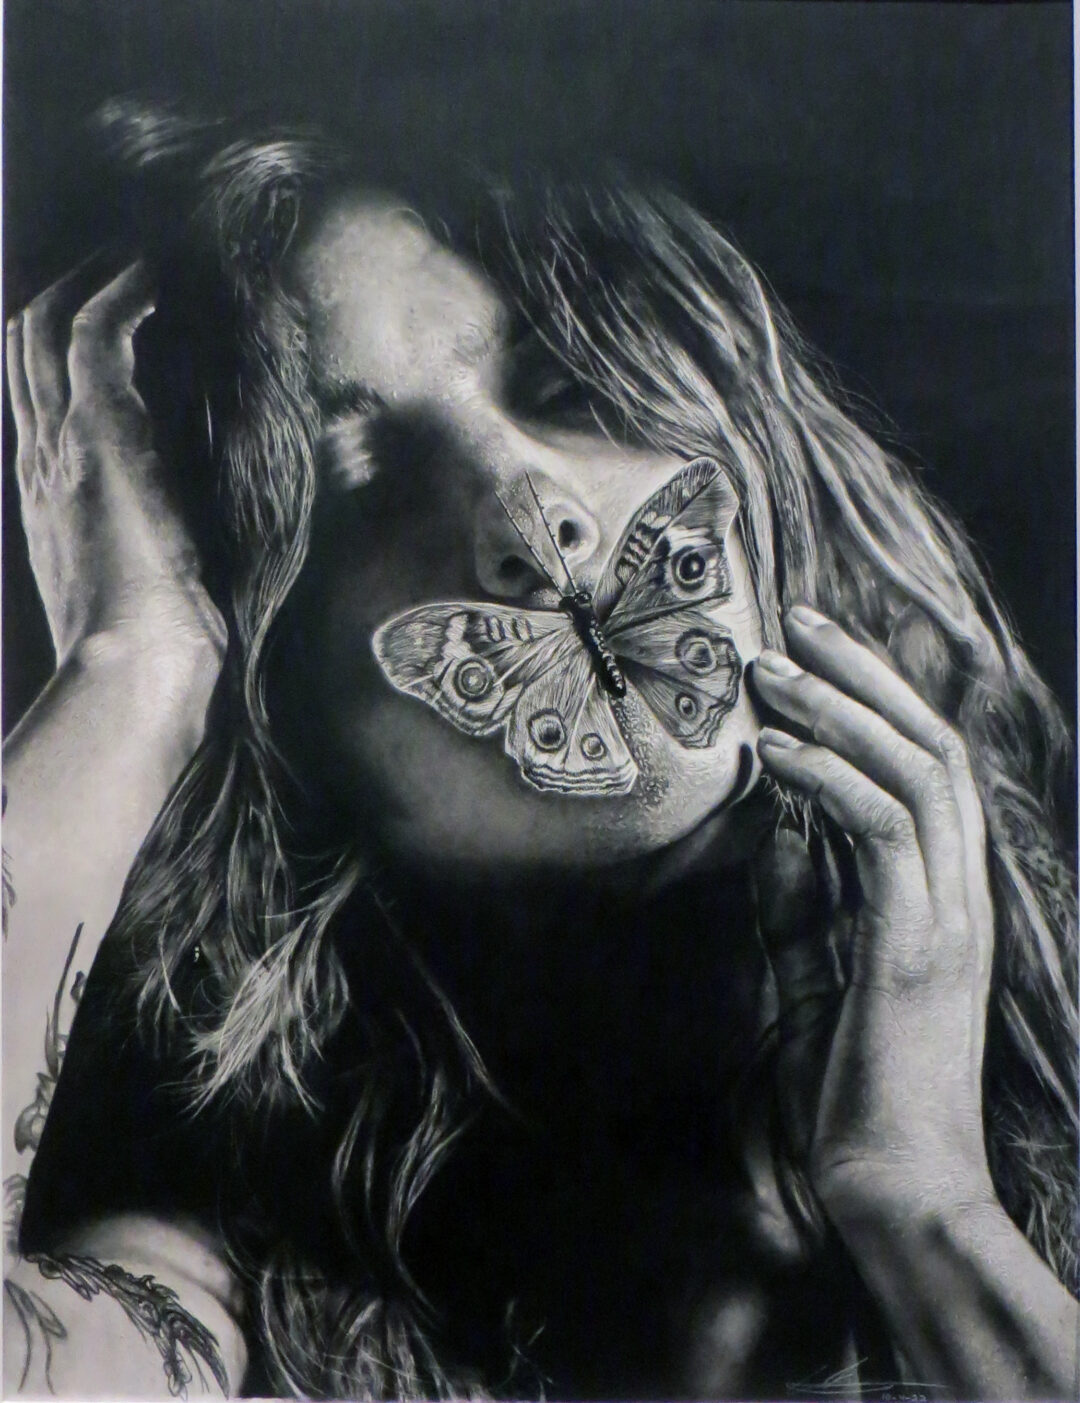 Anthony DaCosta  –  “Talk” charcoal and graphite on Fabriano water color paper hot press, 30”H x 22”W, 2022 NFS